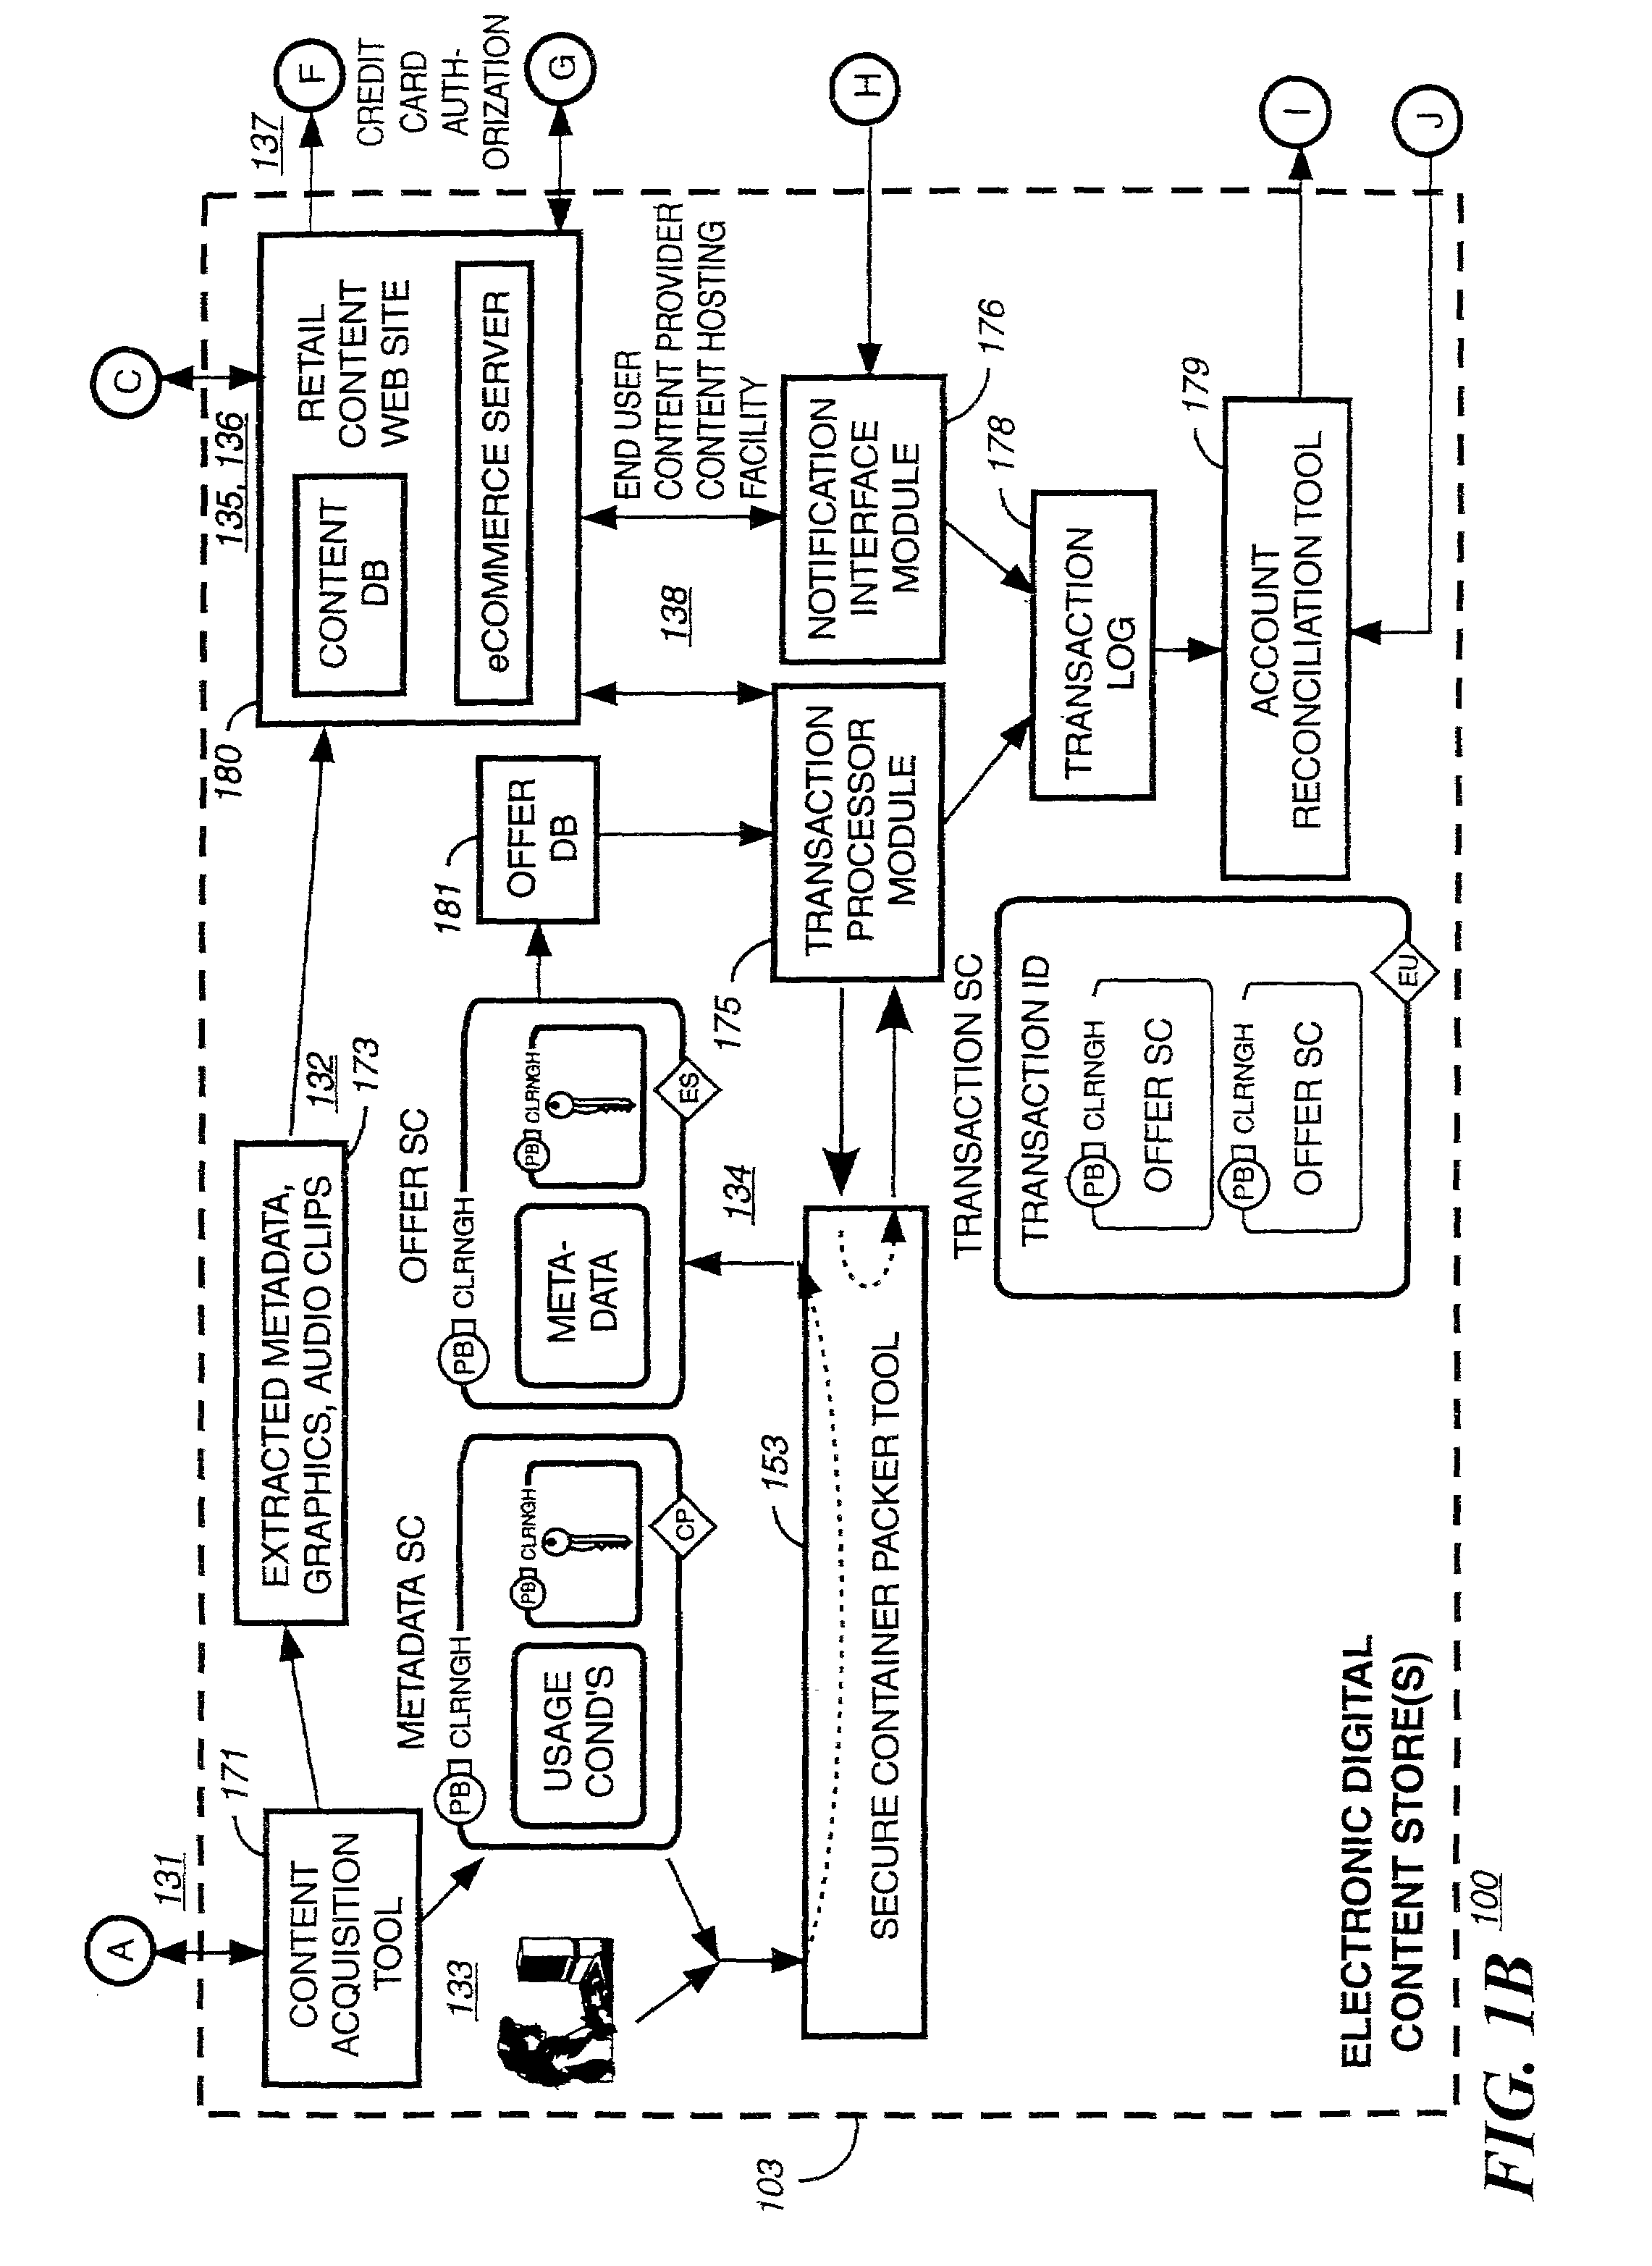 Method and system for securing local database file of local content stored on end-user system